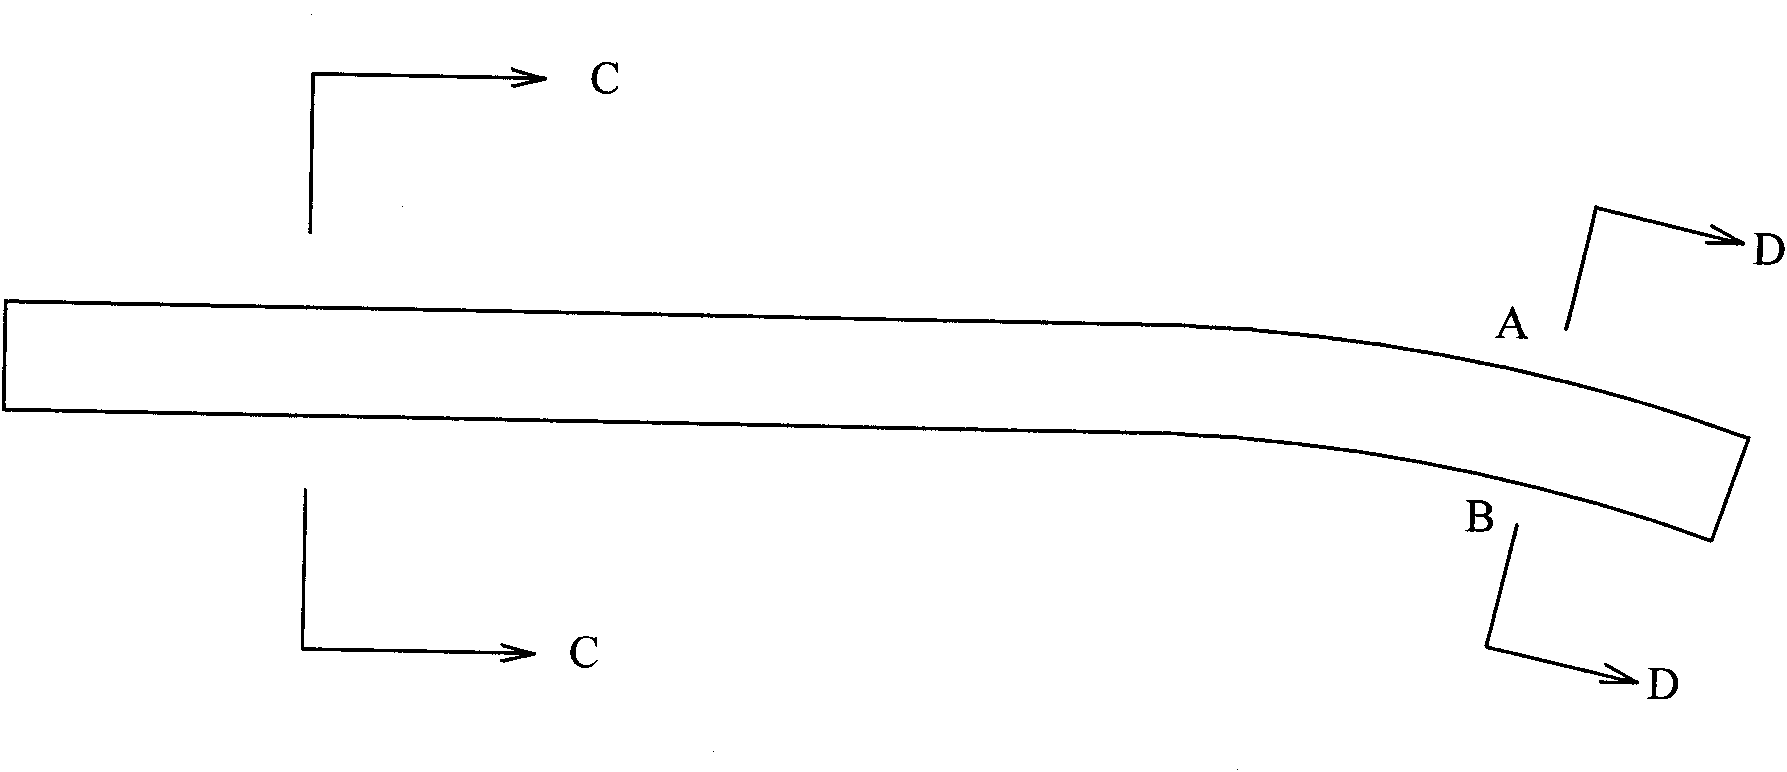 Rotating flexible shaft supporting tube formed by asymmetrically combing double-substrate type supporting blades